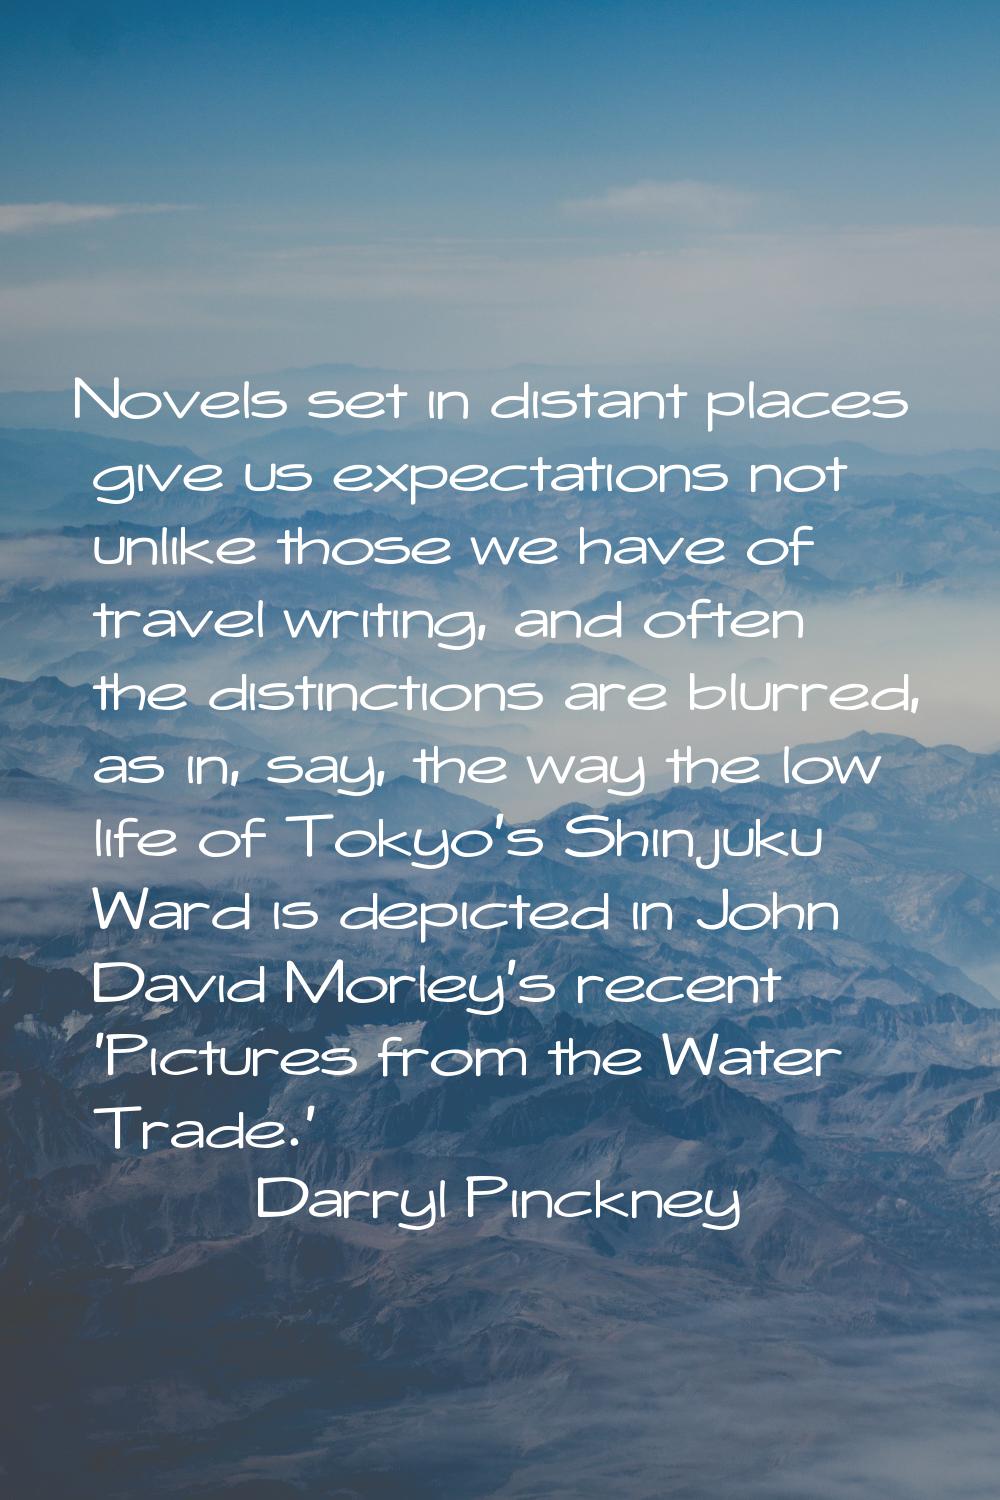 Novels set in distant places give us expectations not unlike those we have of travel writing, and o